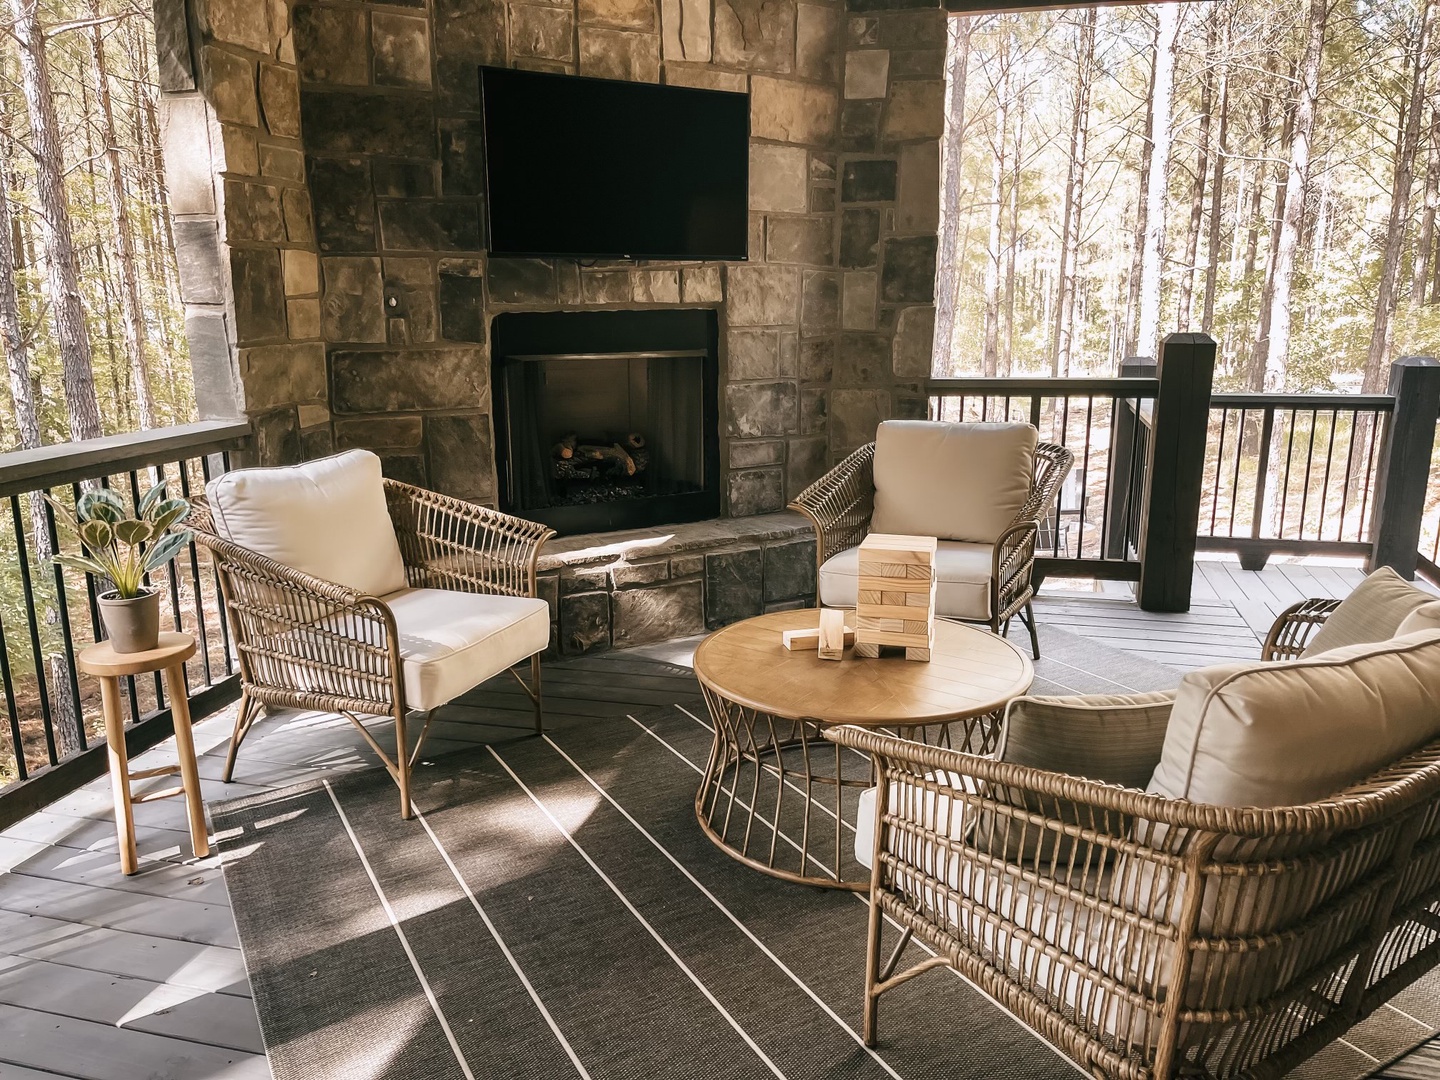 Gas-burning fireplace, TV, and seating on back patio